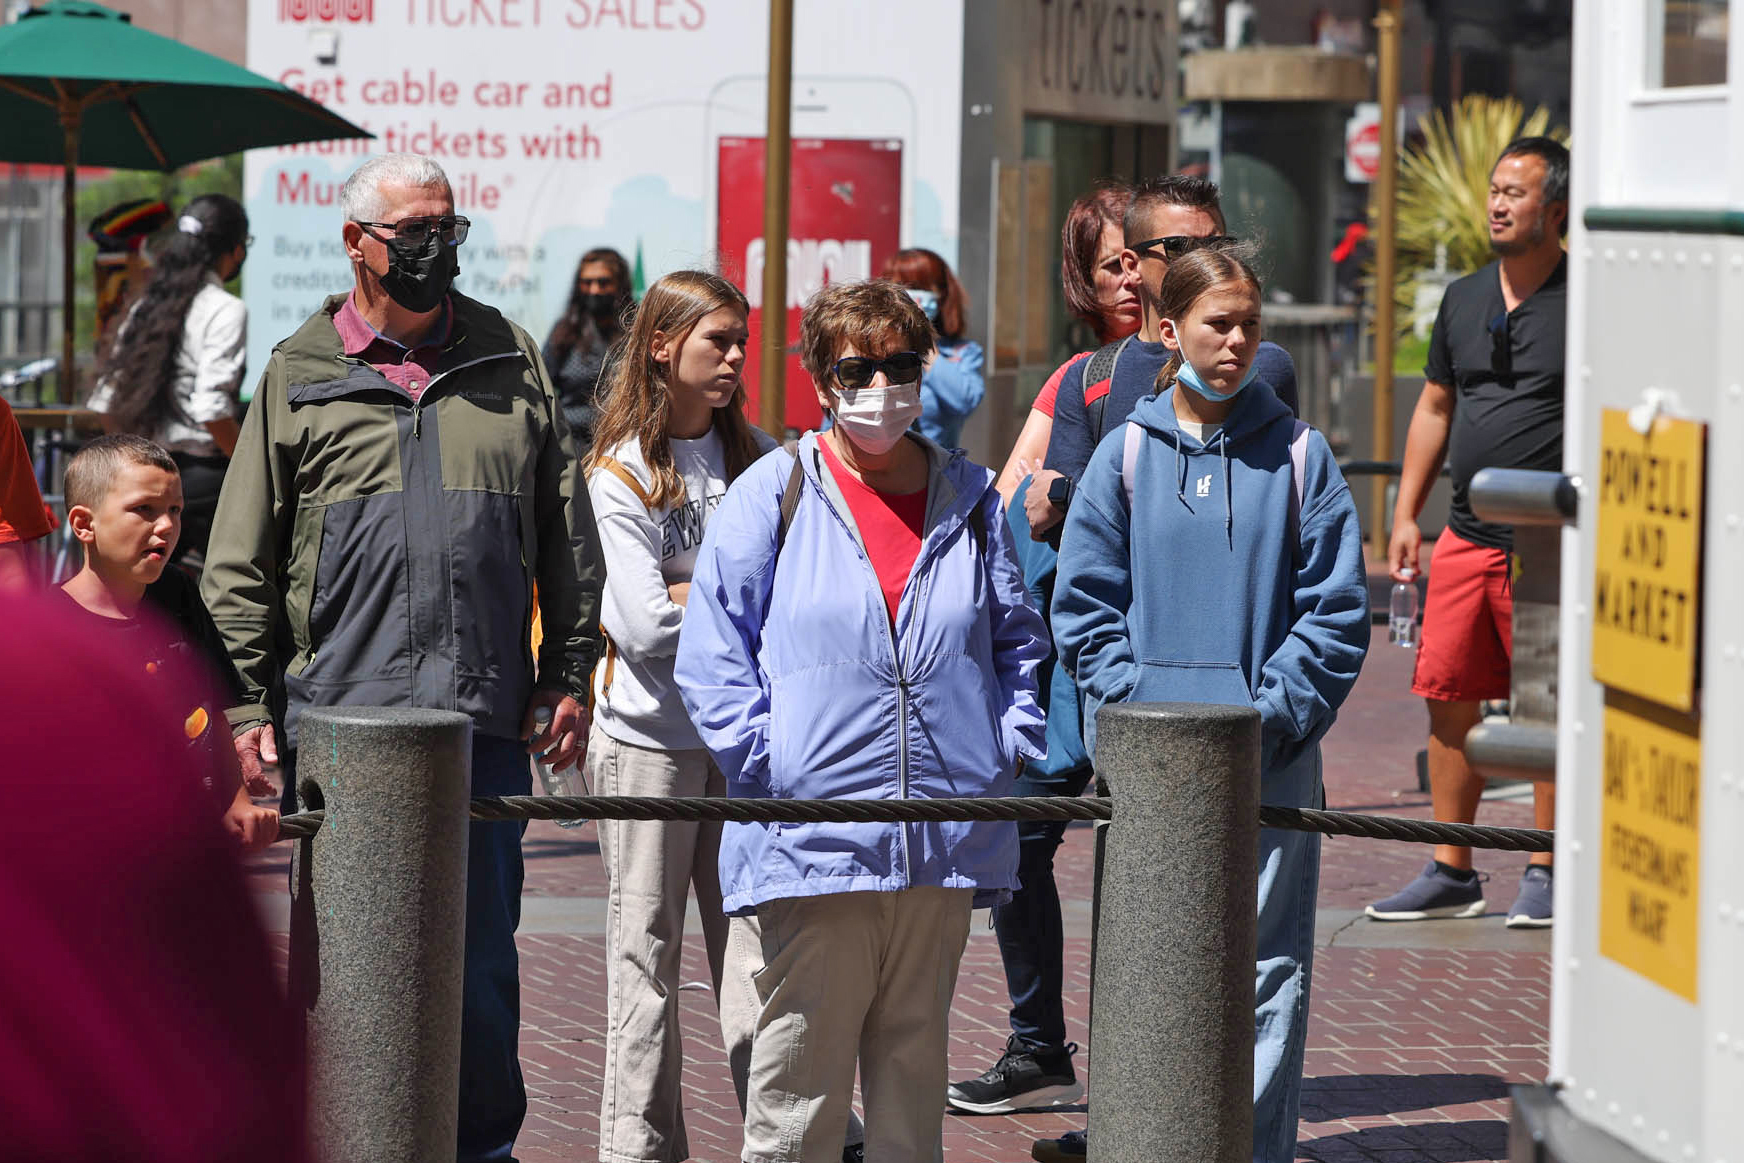 A group of people are seen, some are wearing masks and rain coats on a city street. Some of the people are not wearing masks.